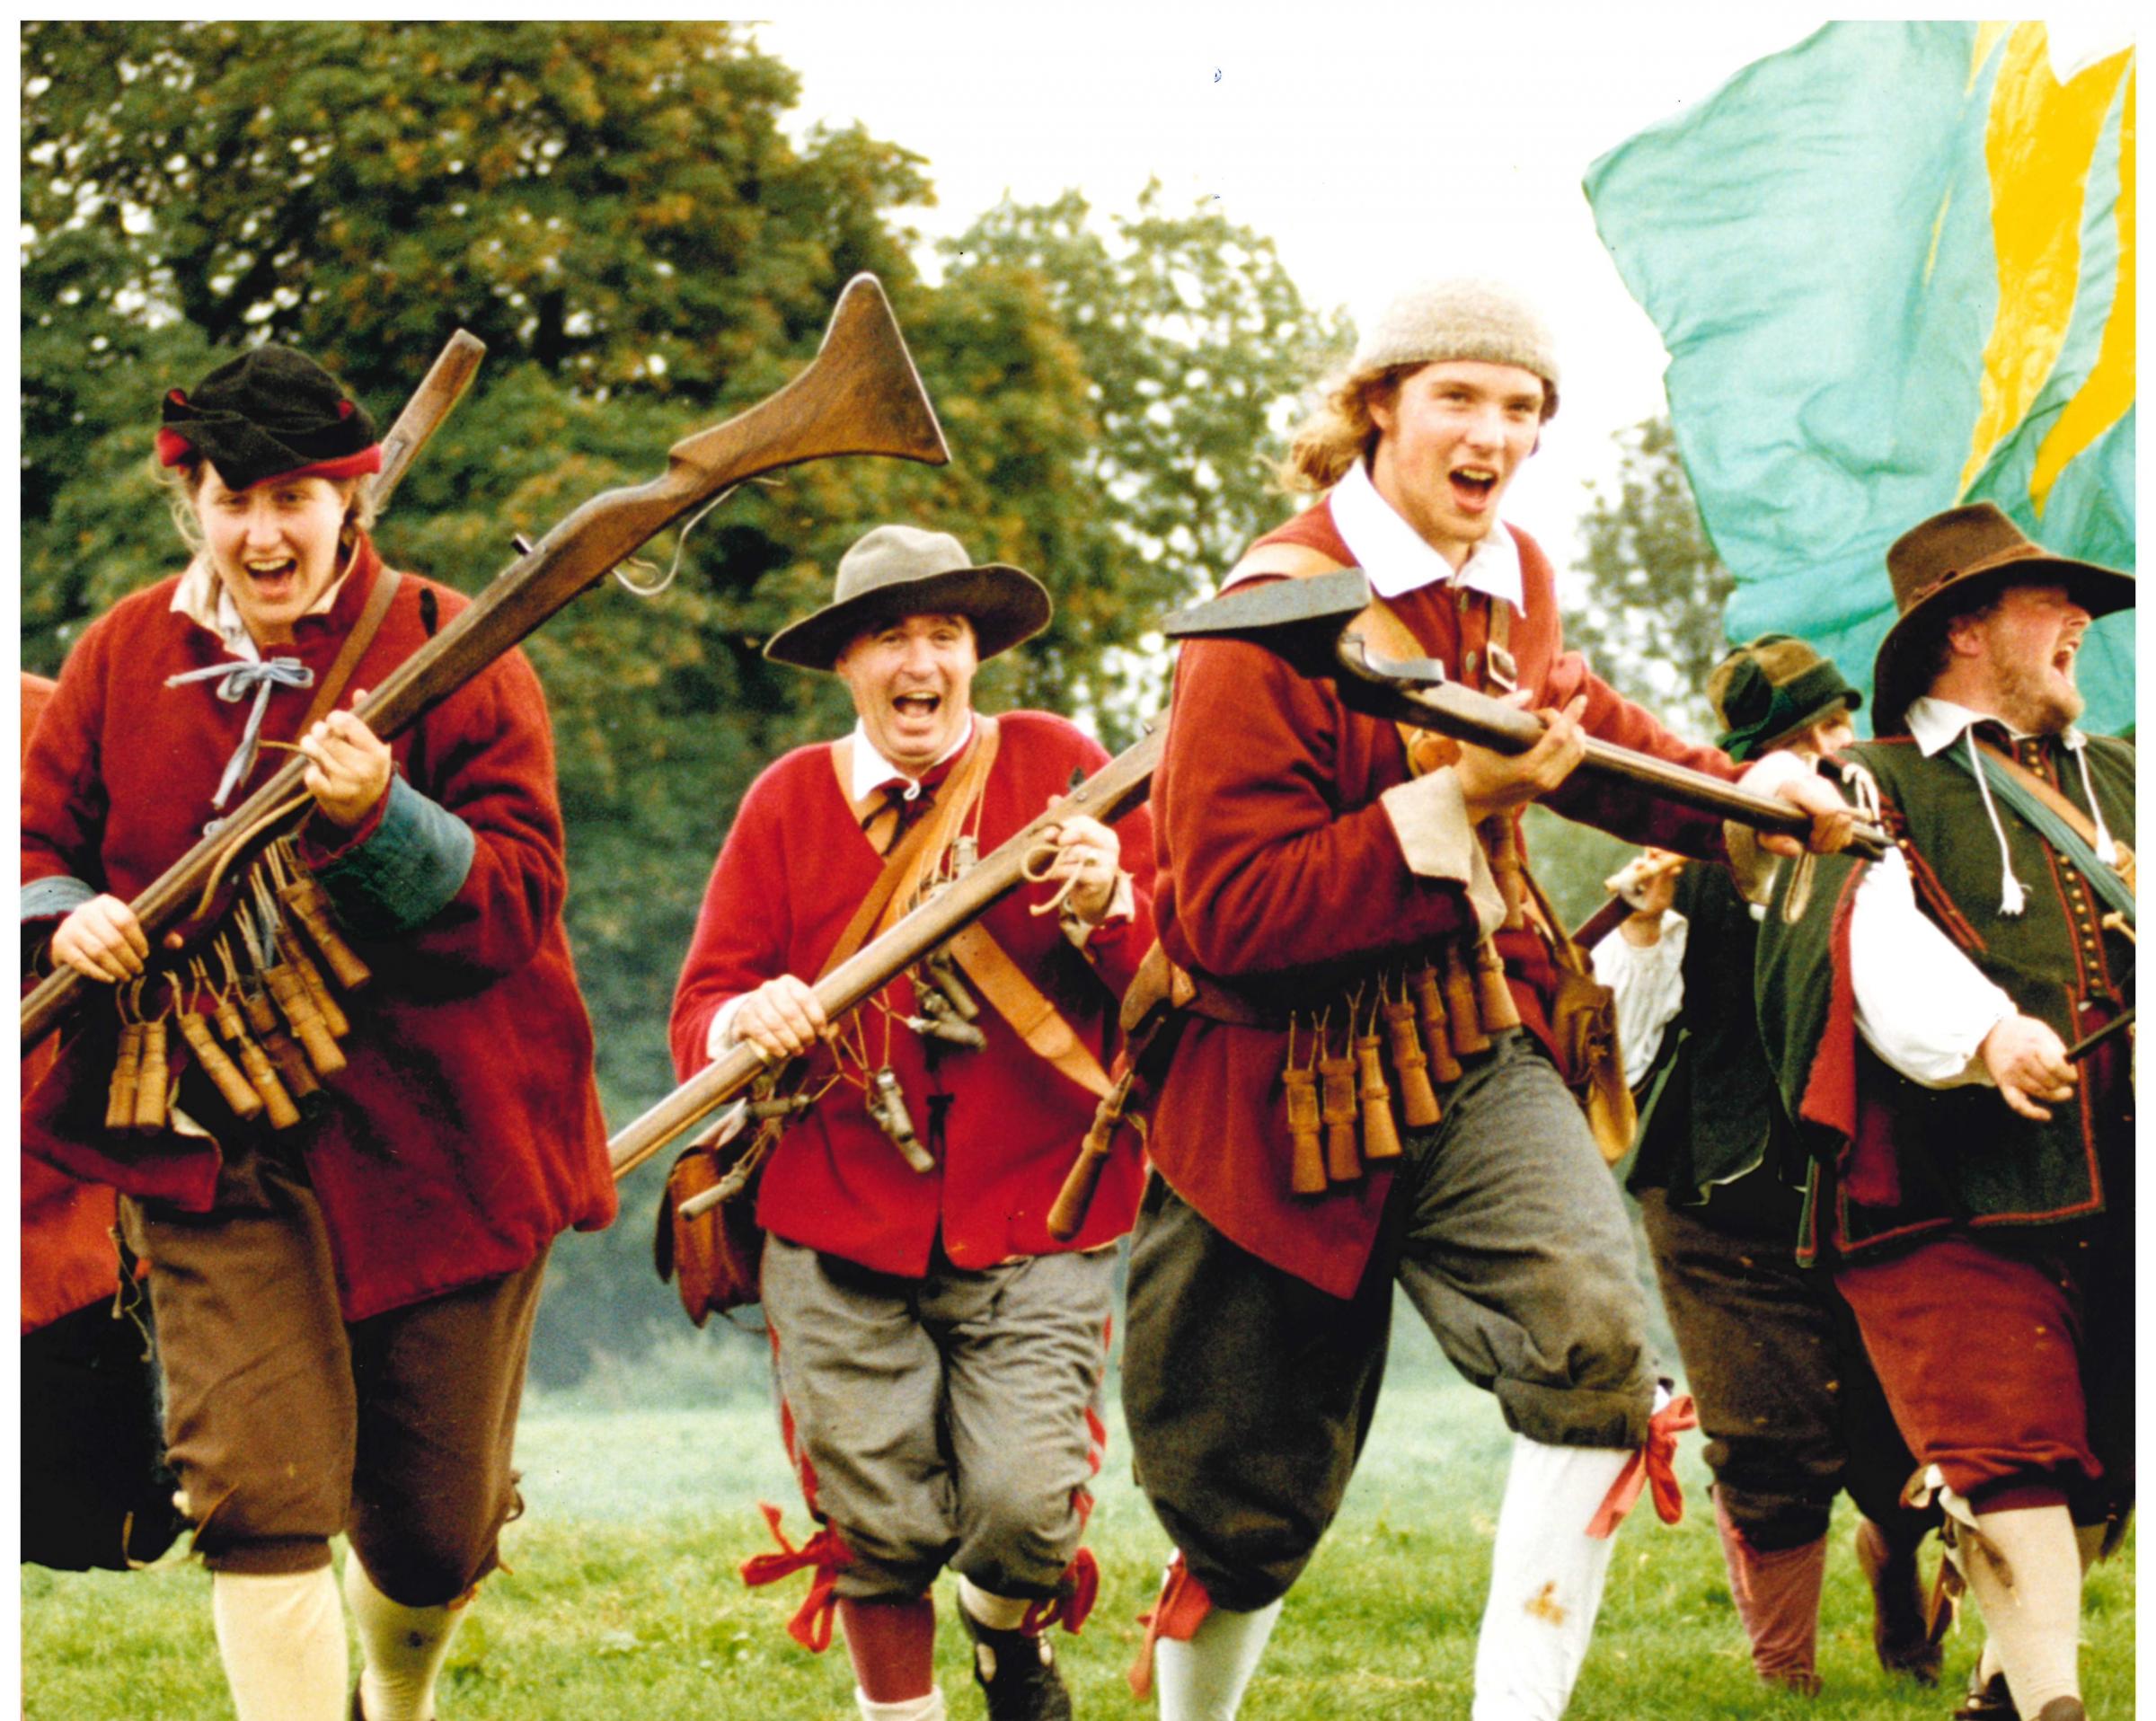 September 1992 saw the 350th anniversary of the Battle of Powick celebrated with re-enactors from the Sealed Knot, the English Civil War Society and the Worcester Militia